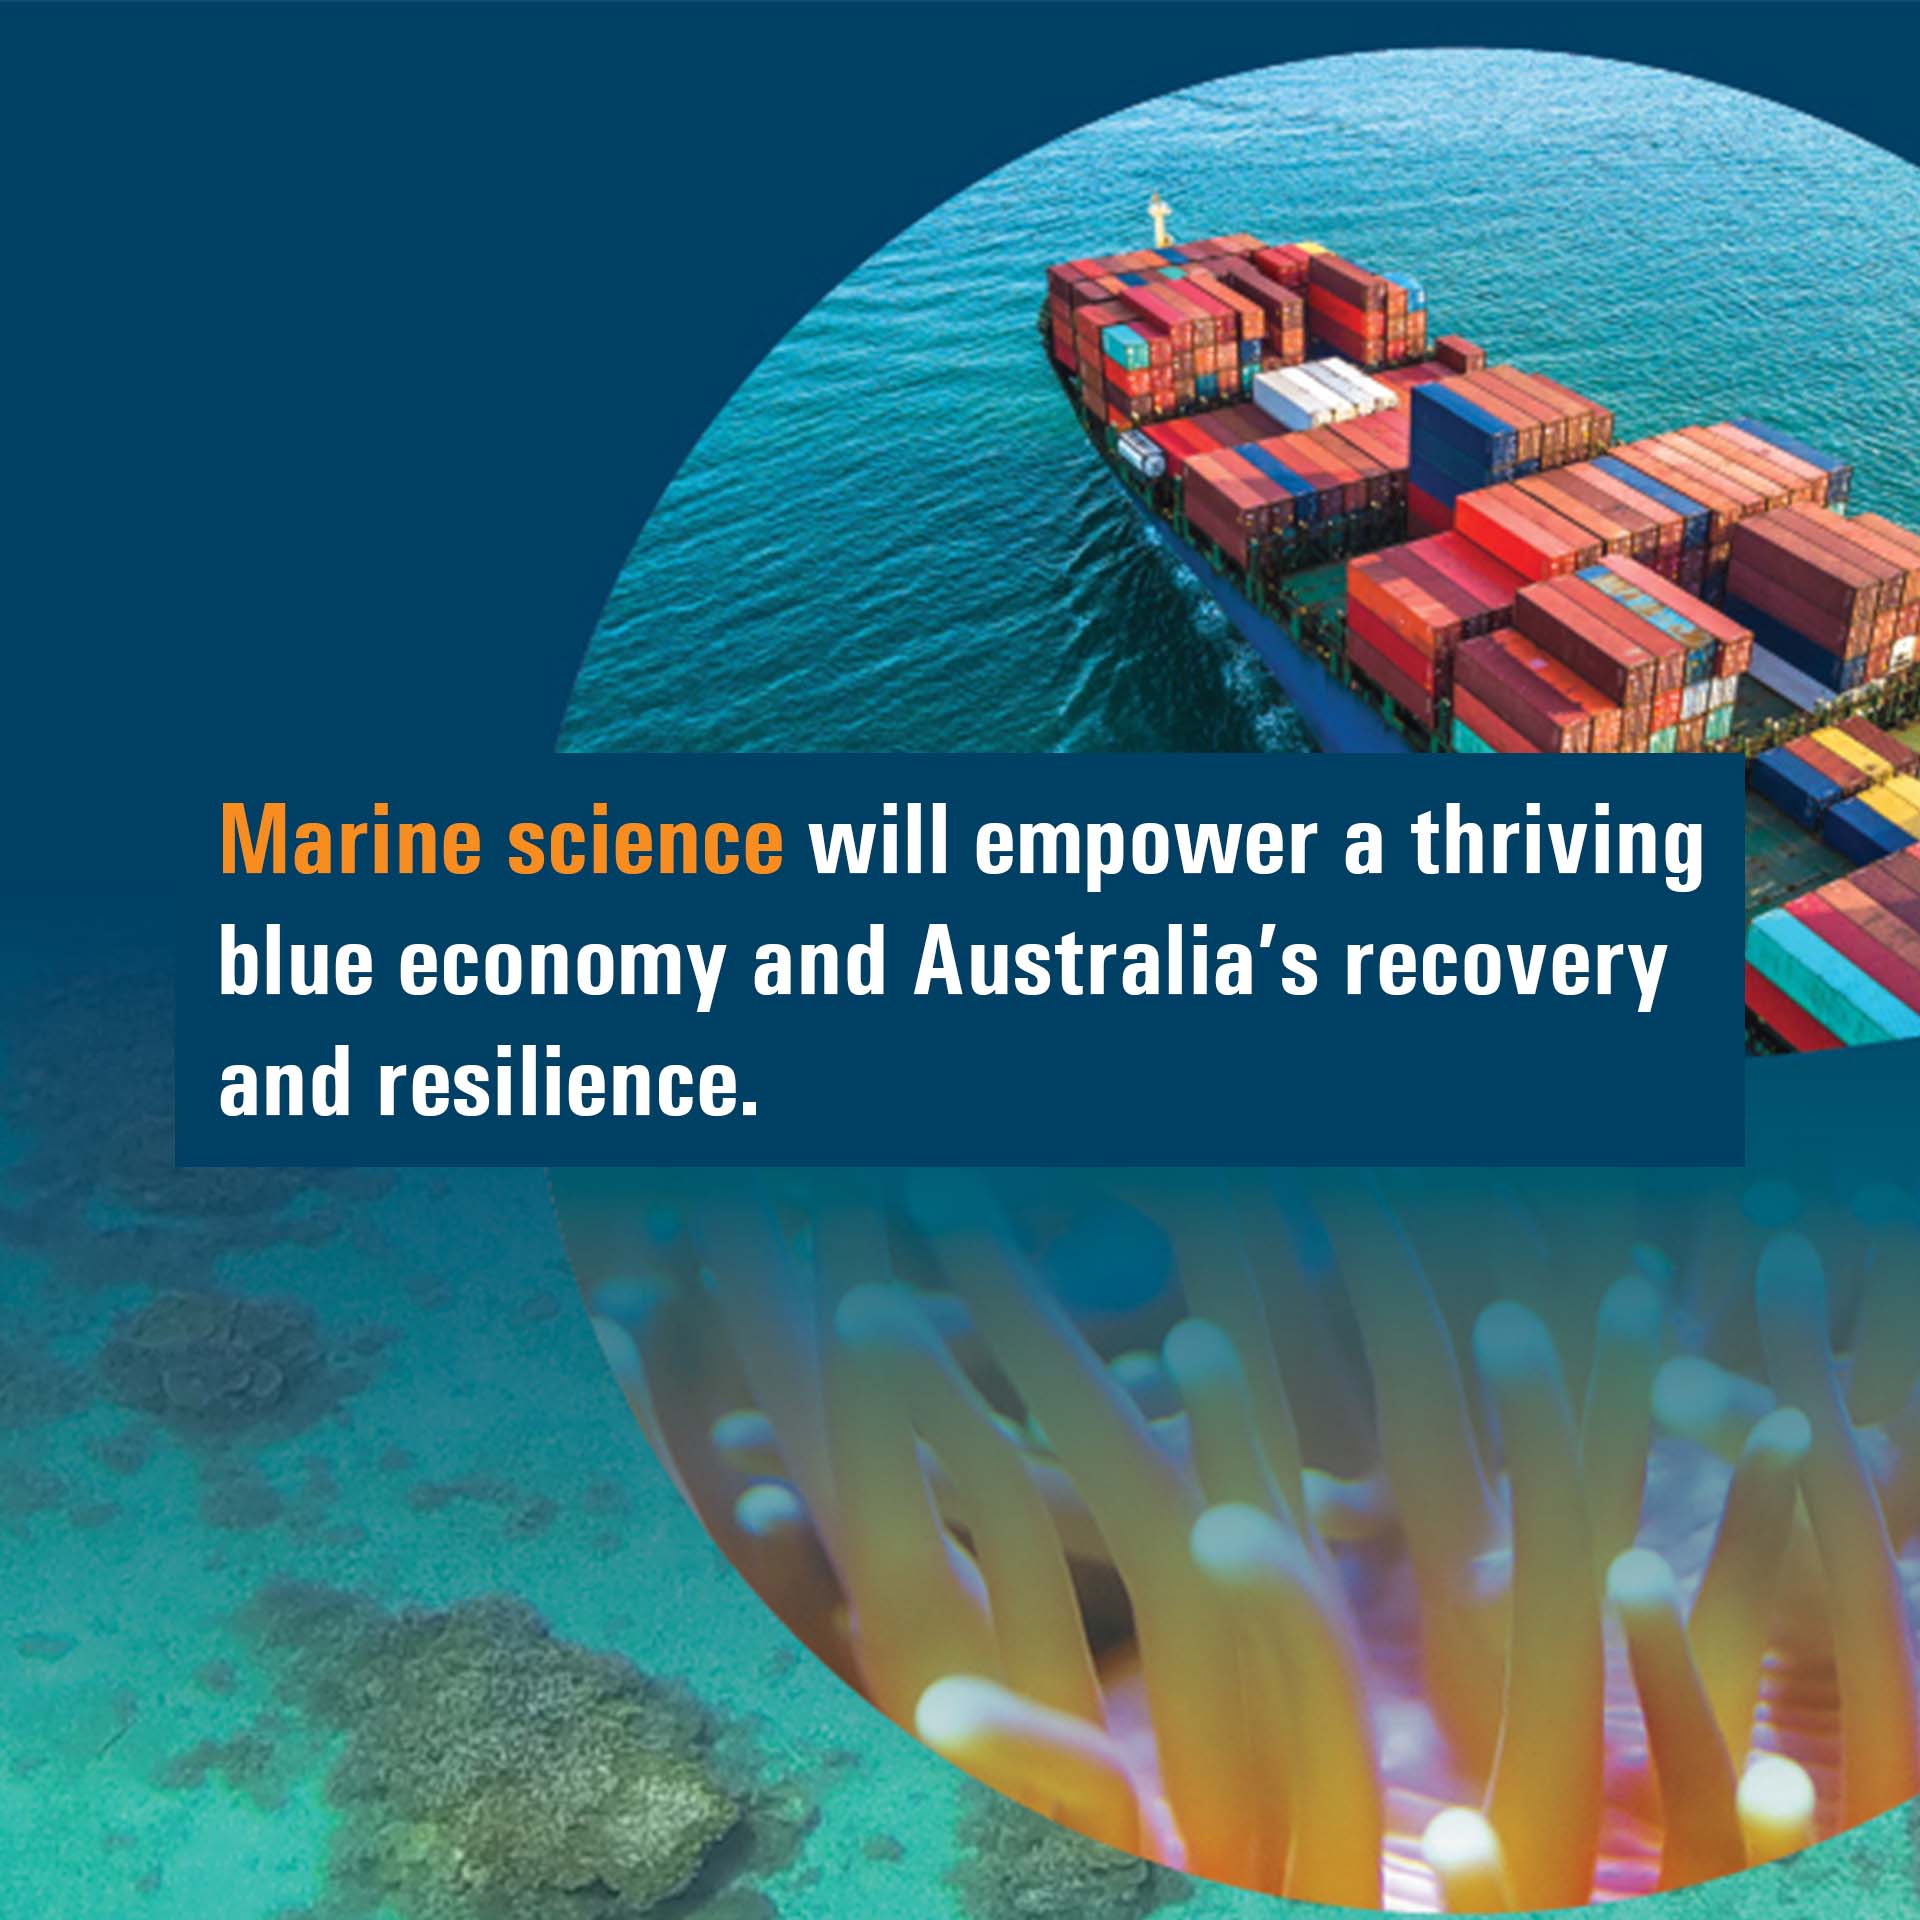 Marine science priorities to enable the blue economy and Australia’s economic recovery